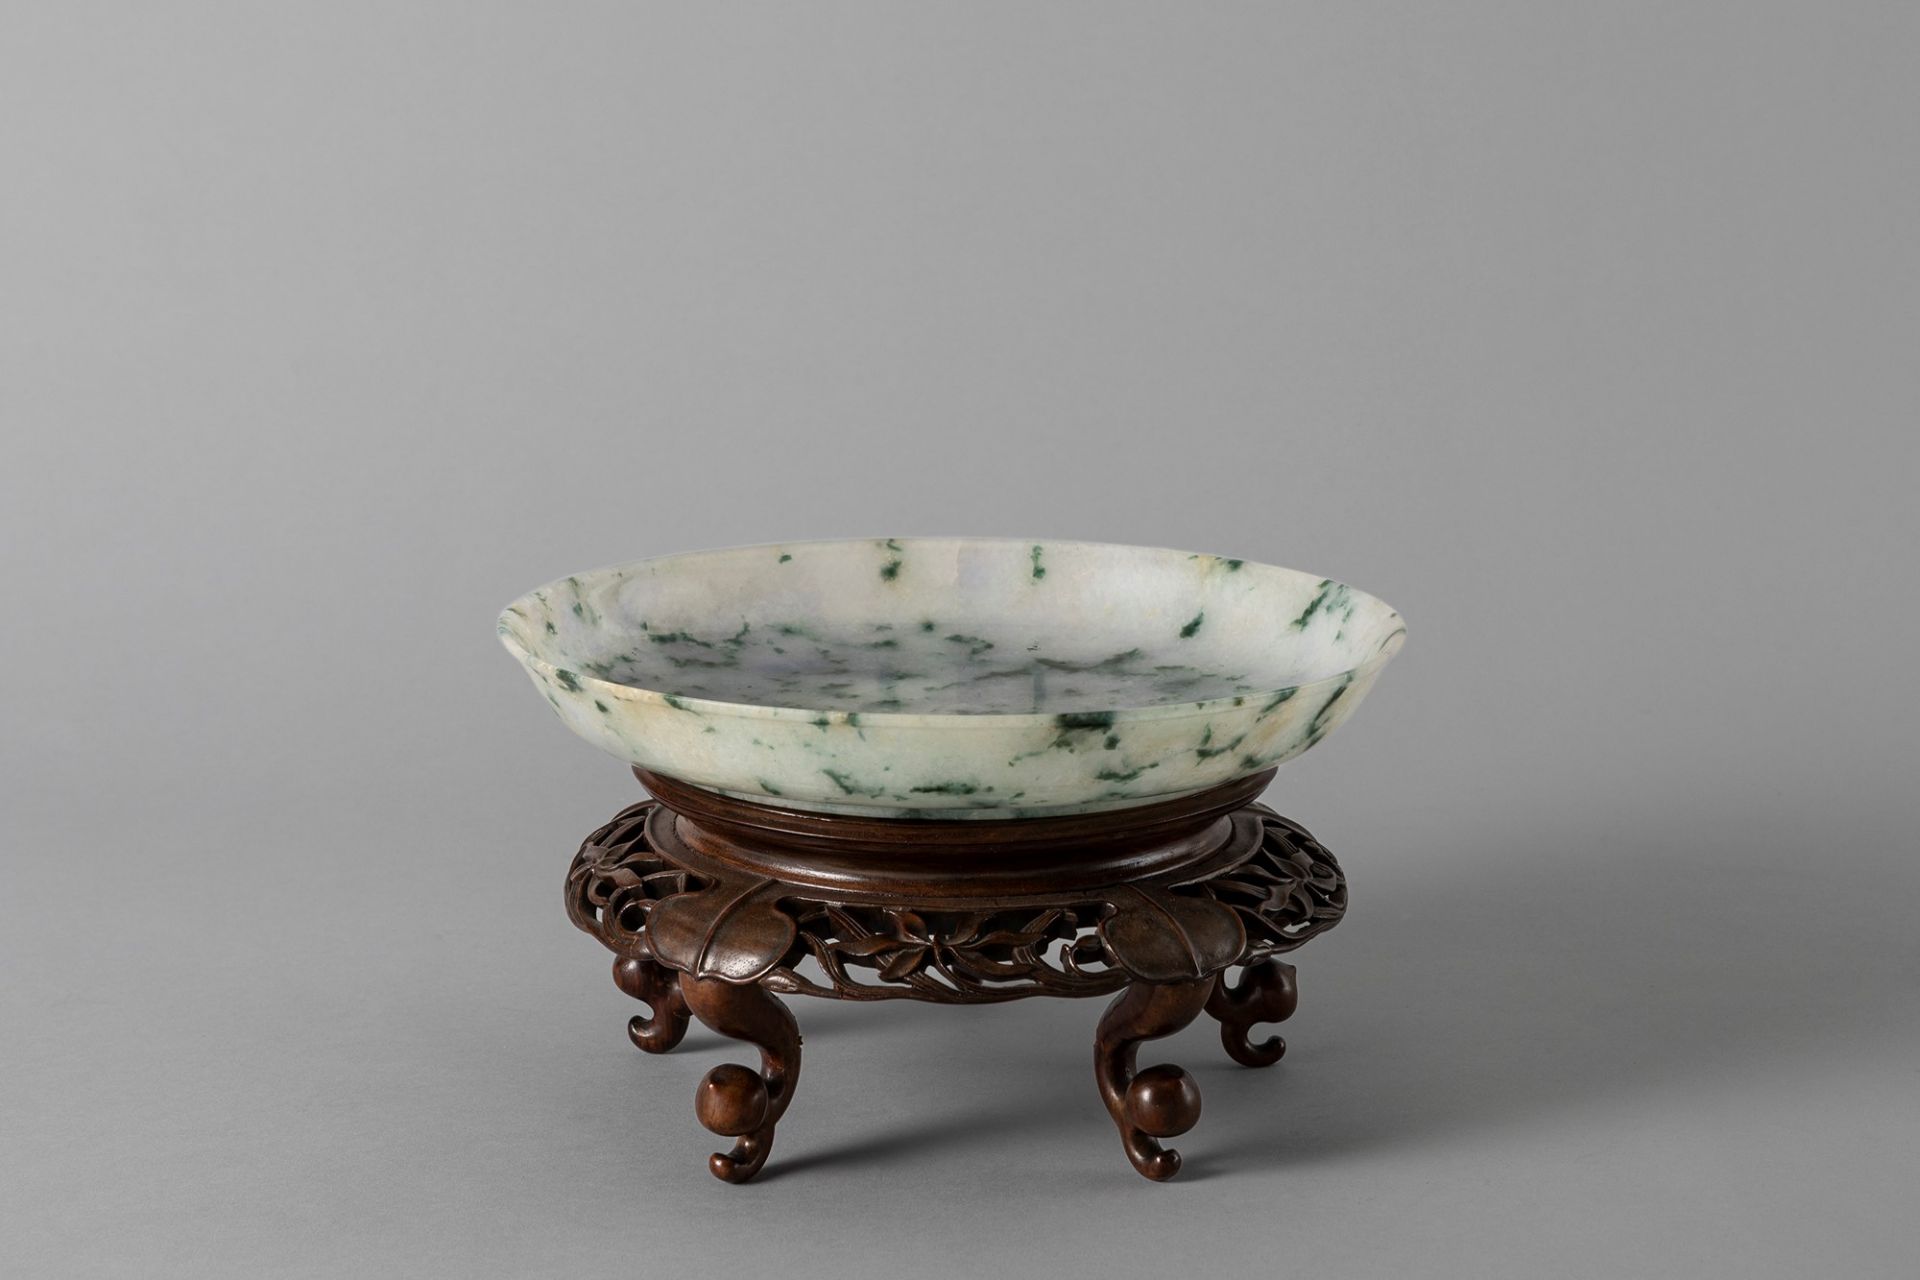 An apple green jade plate. China, late Qing dynasty